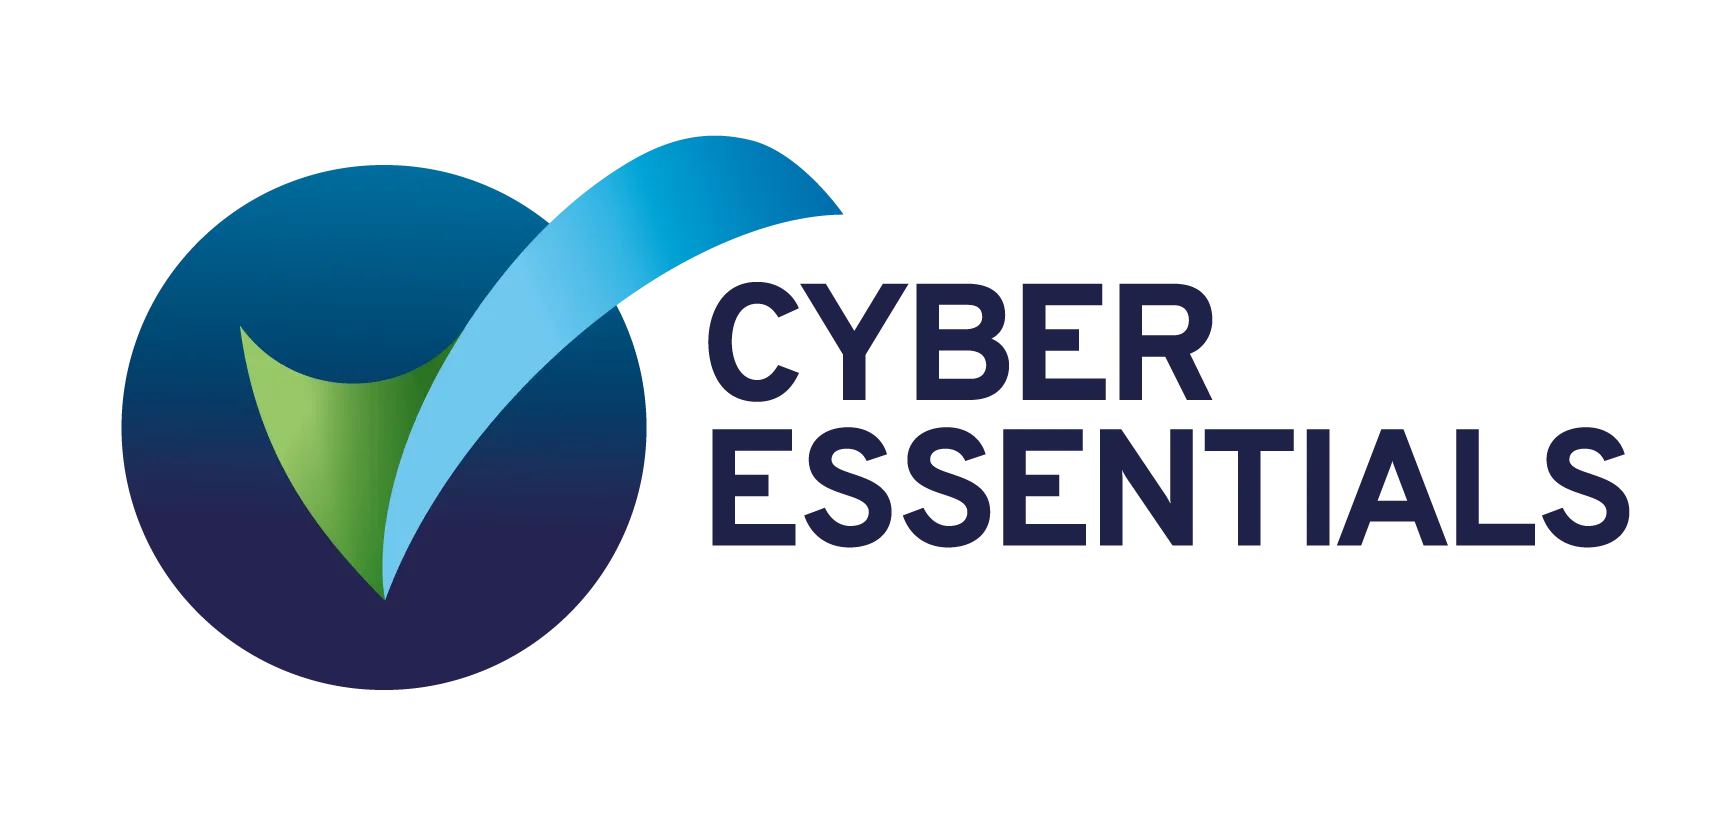 the logo for cyber essentials